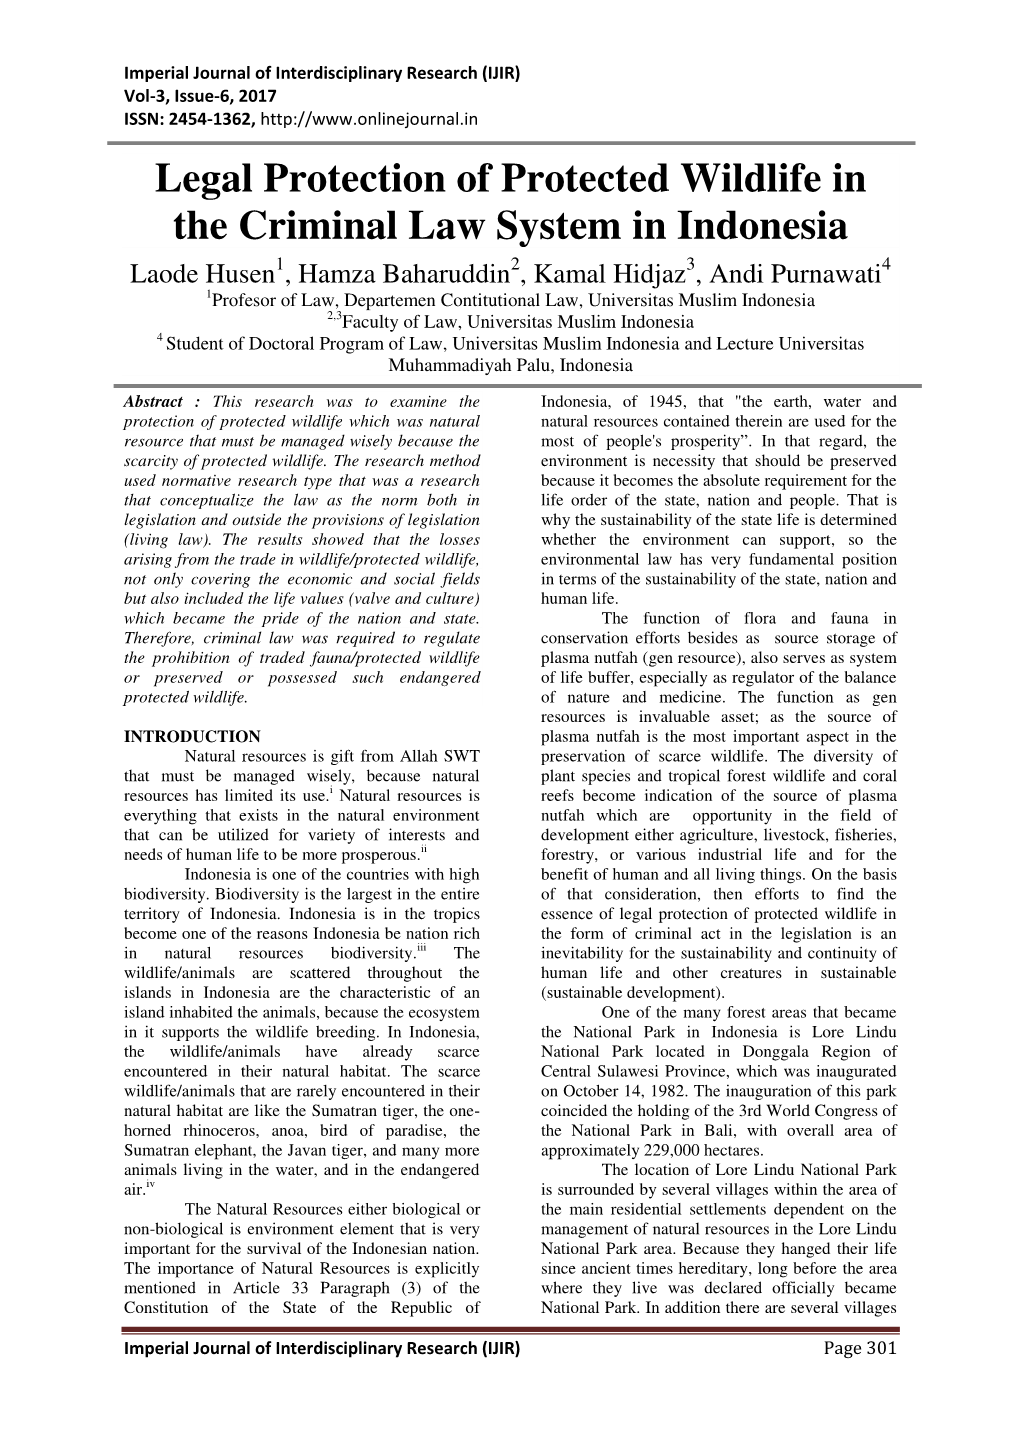 Legal Protection of Protected Wildlife in the Criminal Law System in Indonesia